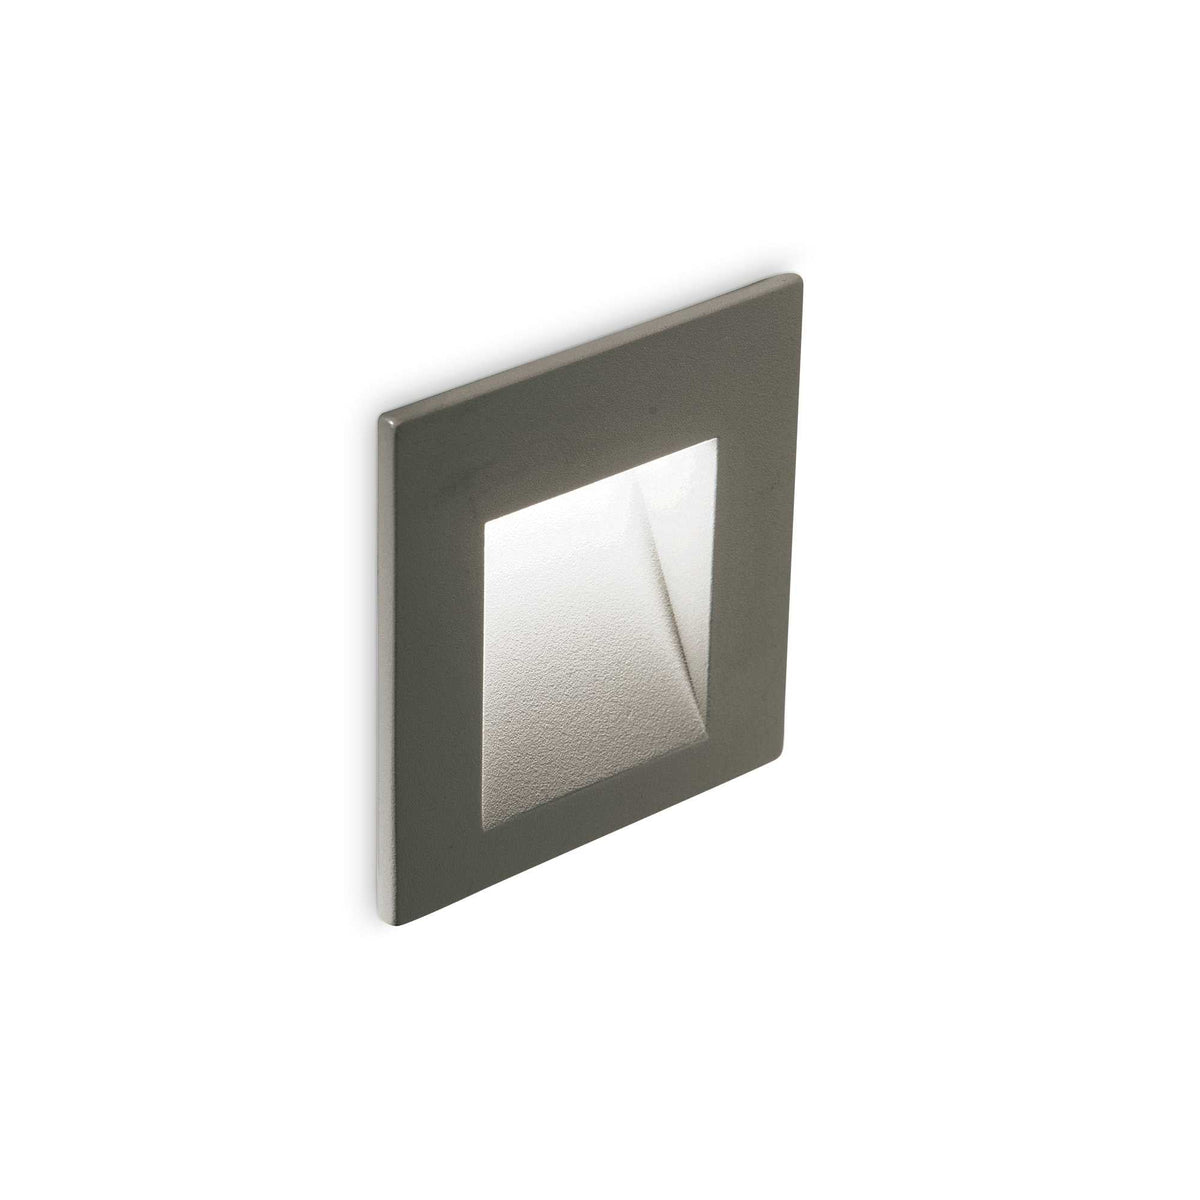 Bit Recessed Wall Light - Anthracite/White Finish - Cusack Lighting